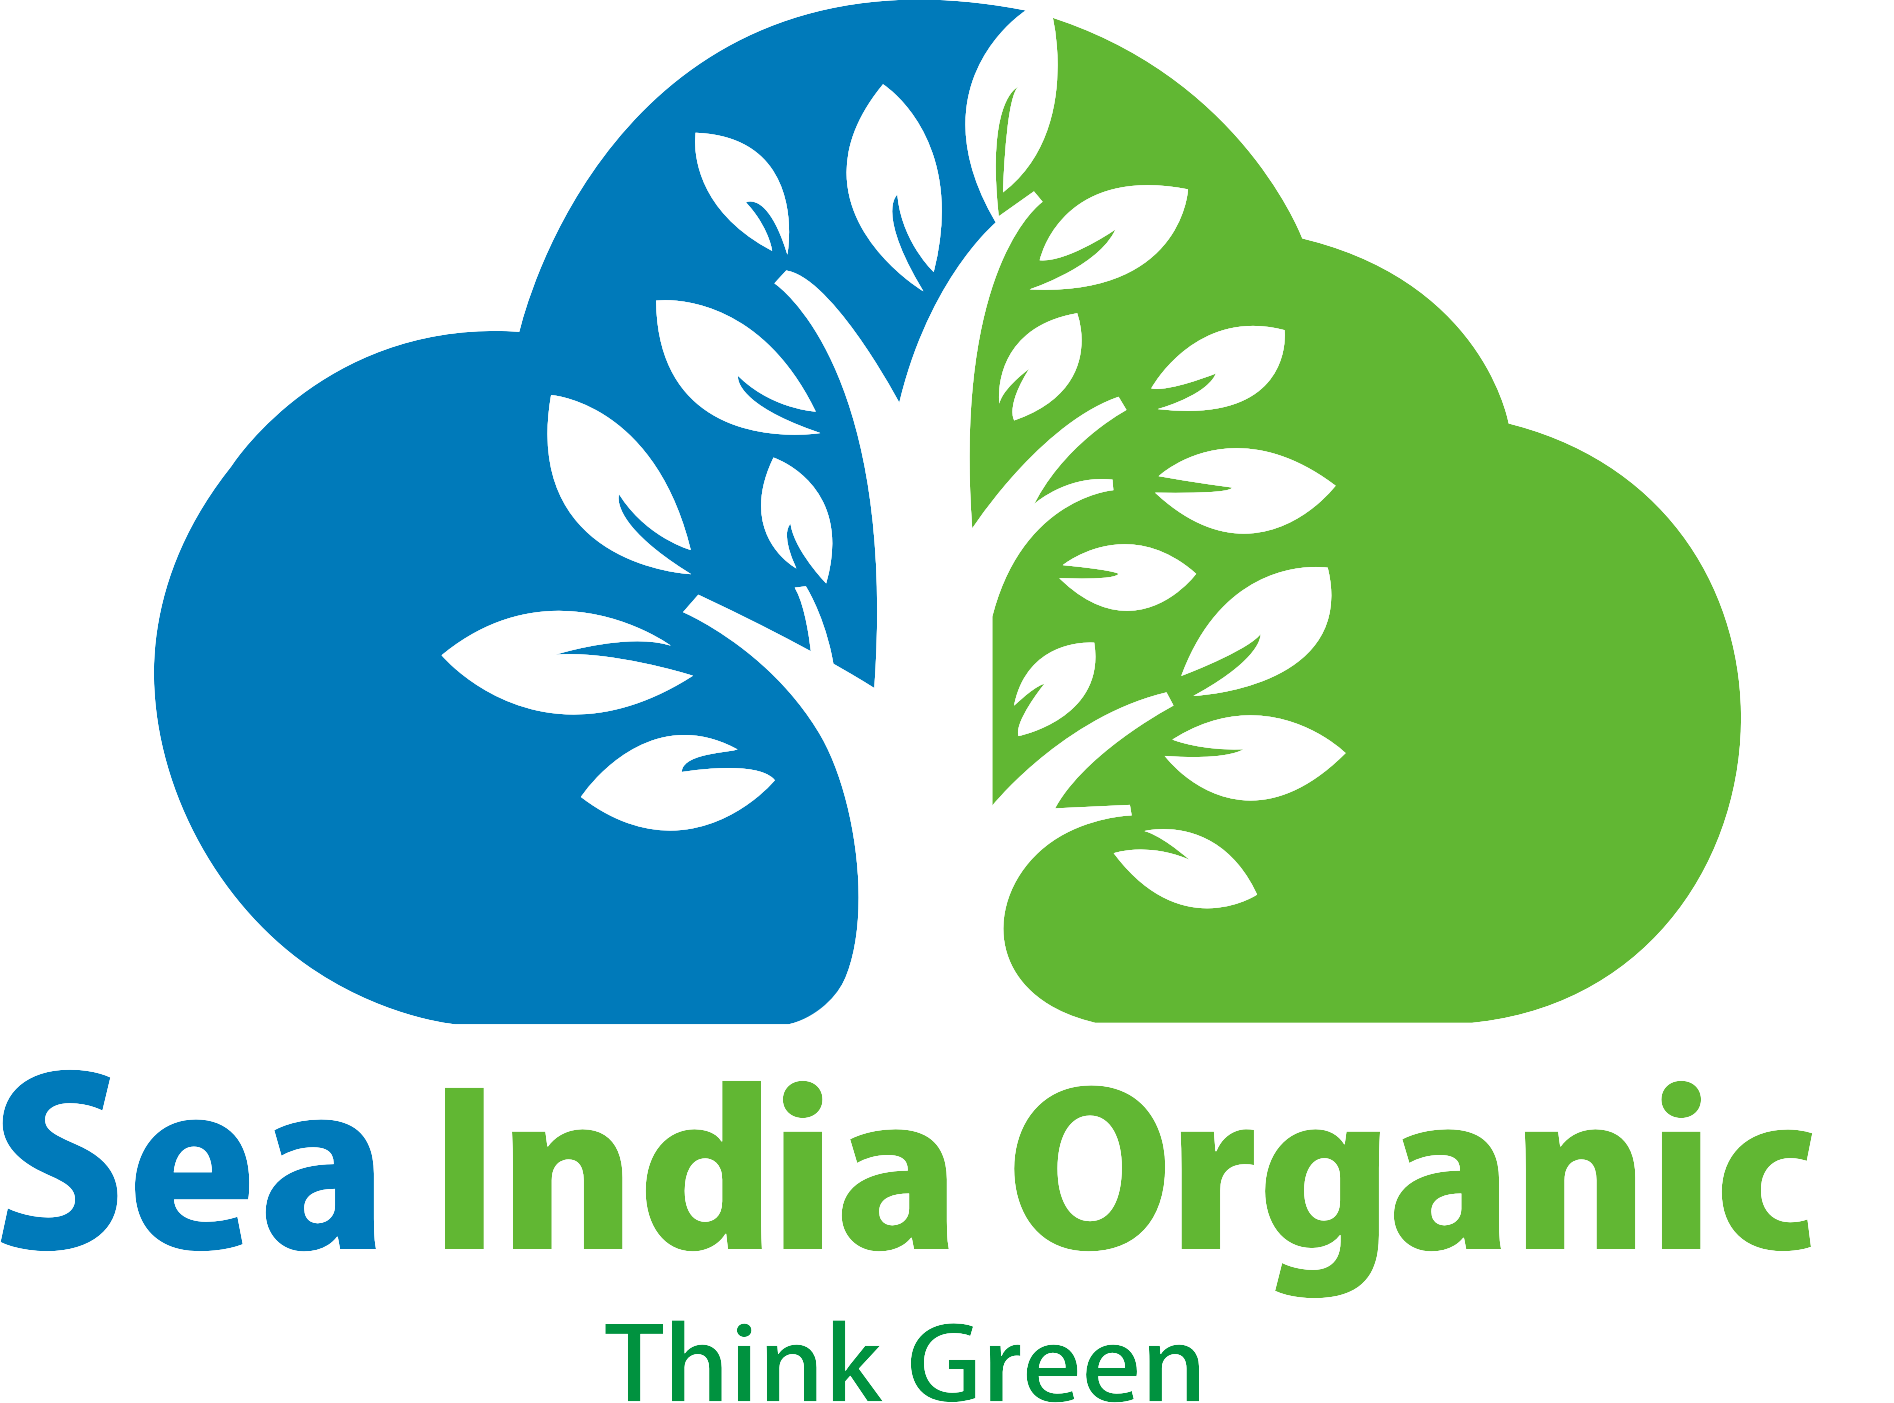 Sea India Organic Means Absolute Commitment To Quality - Cloud Tree (1894x1403)